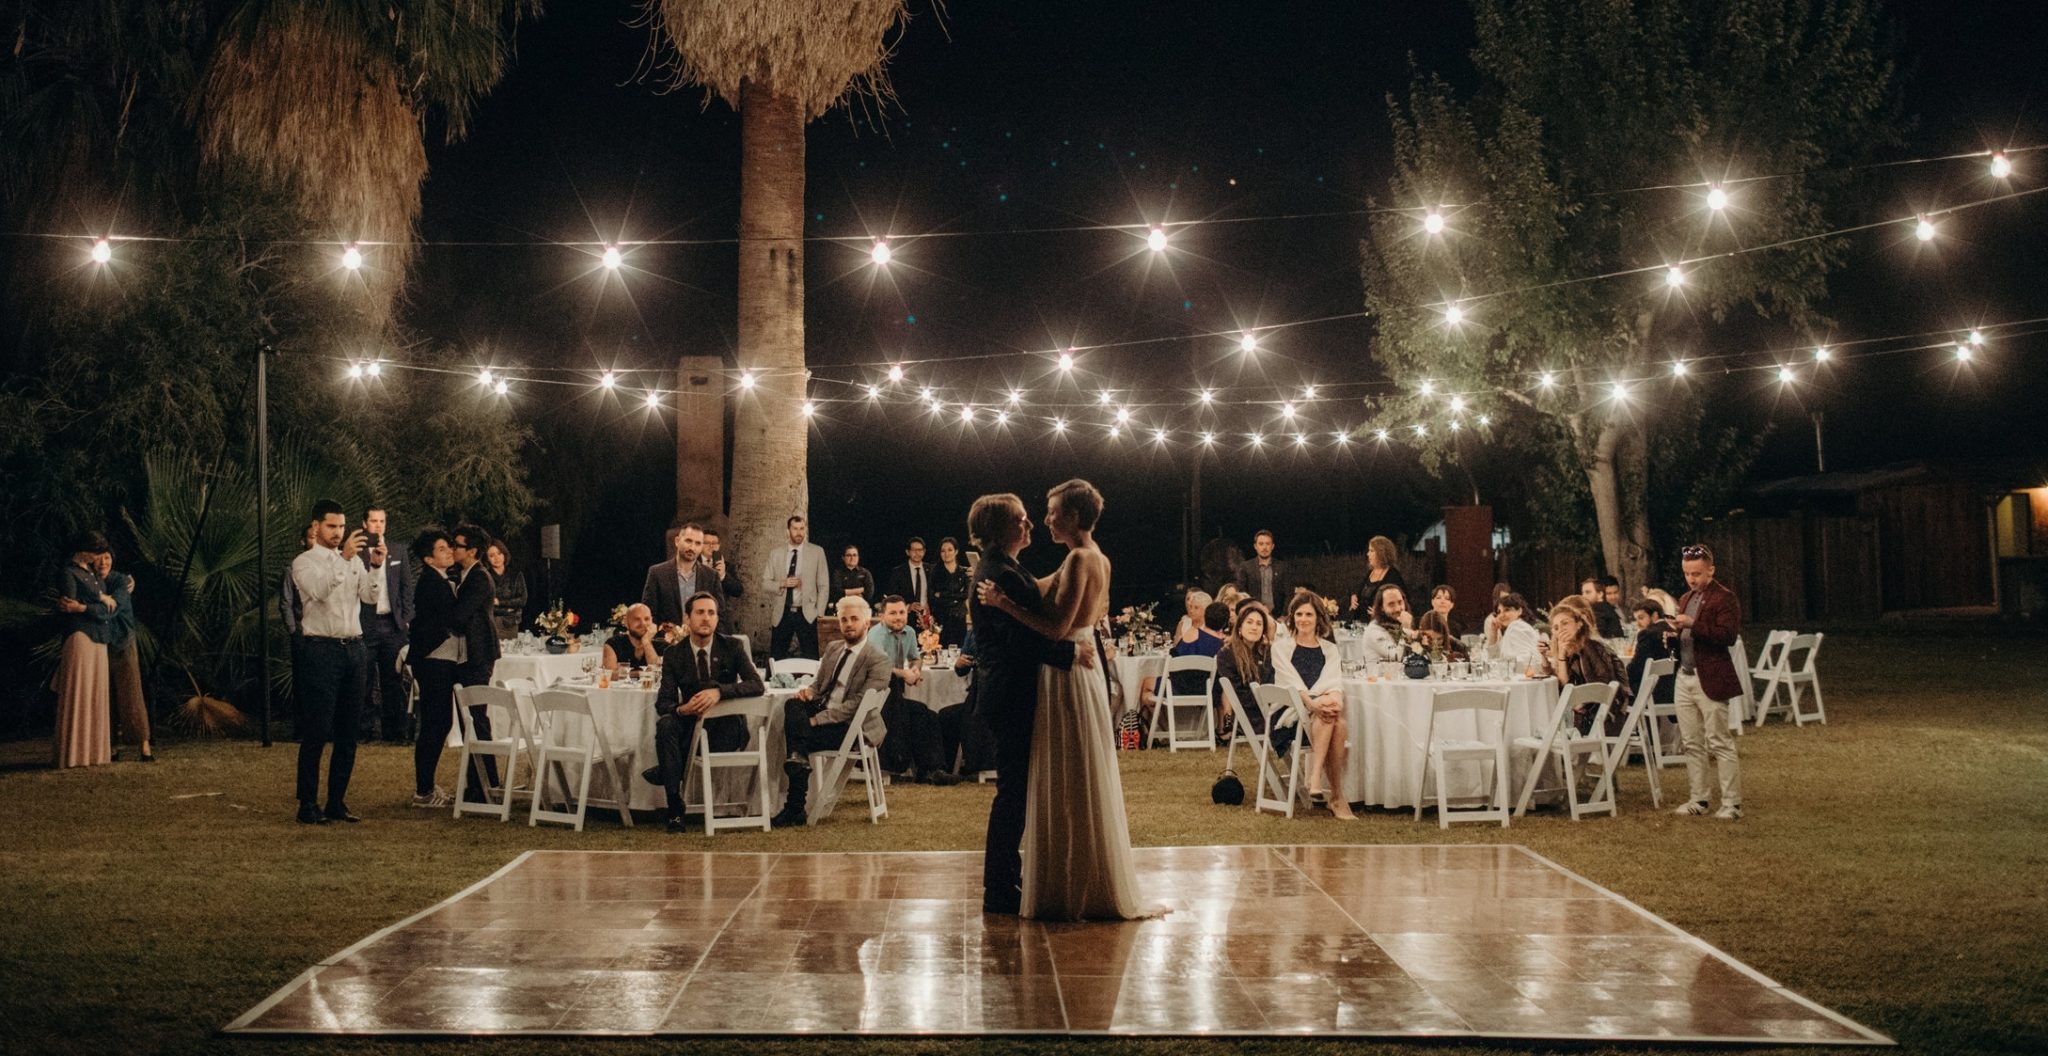 A wedding couple has their first dance on a outdoor dance floor surrounded by palm trees and string lights as their guests look on in a photo by Betty Clicker